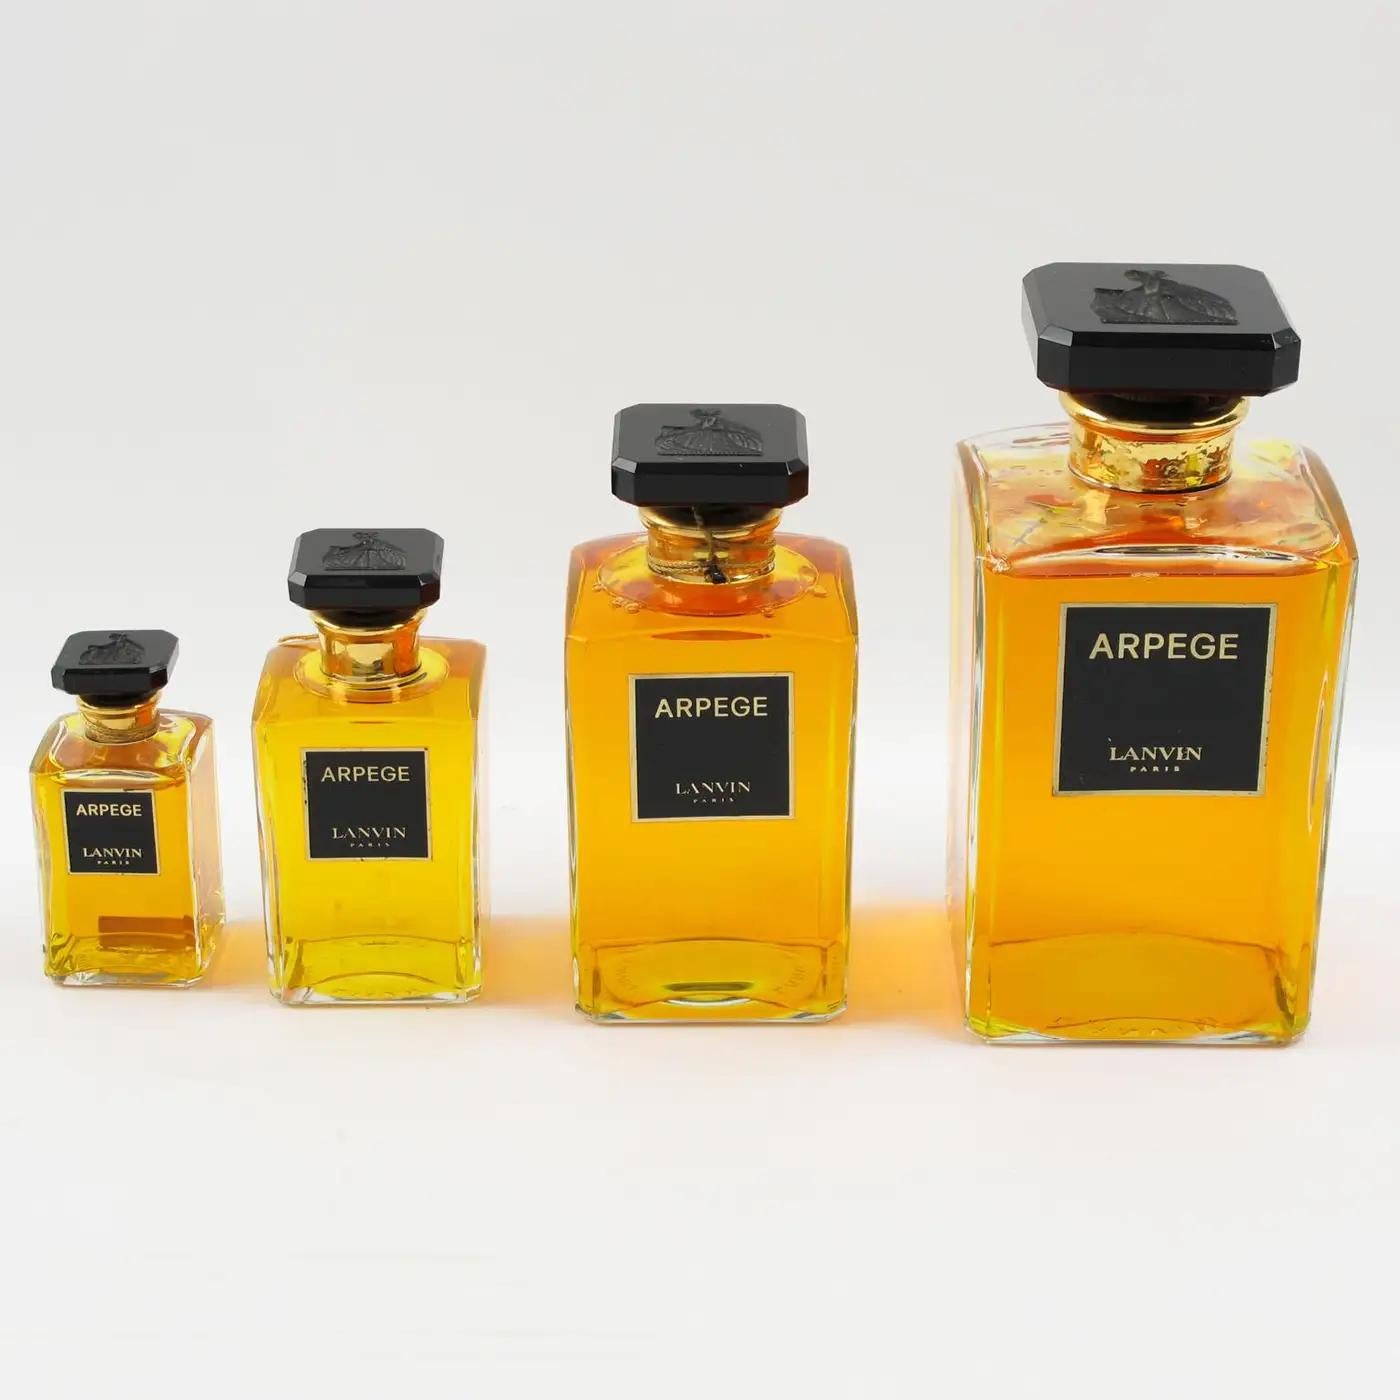 This is a gorgeous set of four Lanvin fragrance retail store display factice crystal bottles. This set was created solely for use as promotional advertising store displays. The assorted scale streamlined bottles feature Lanvin 